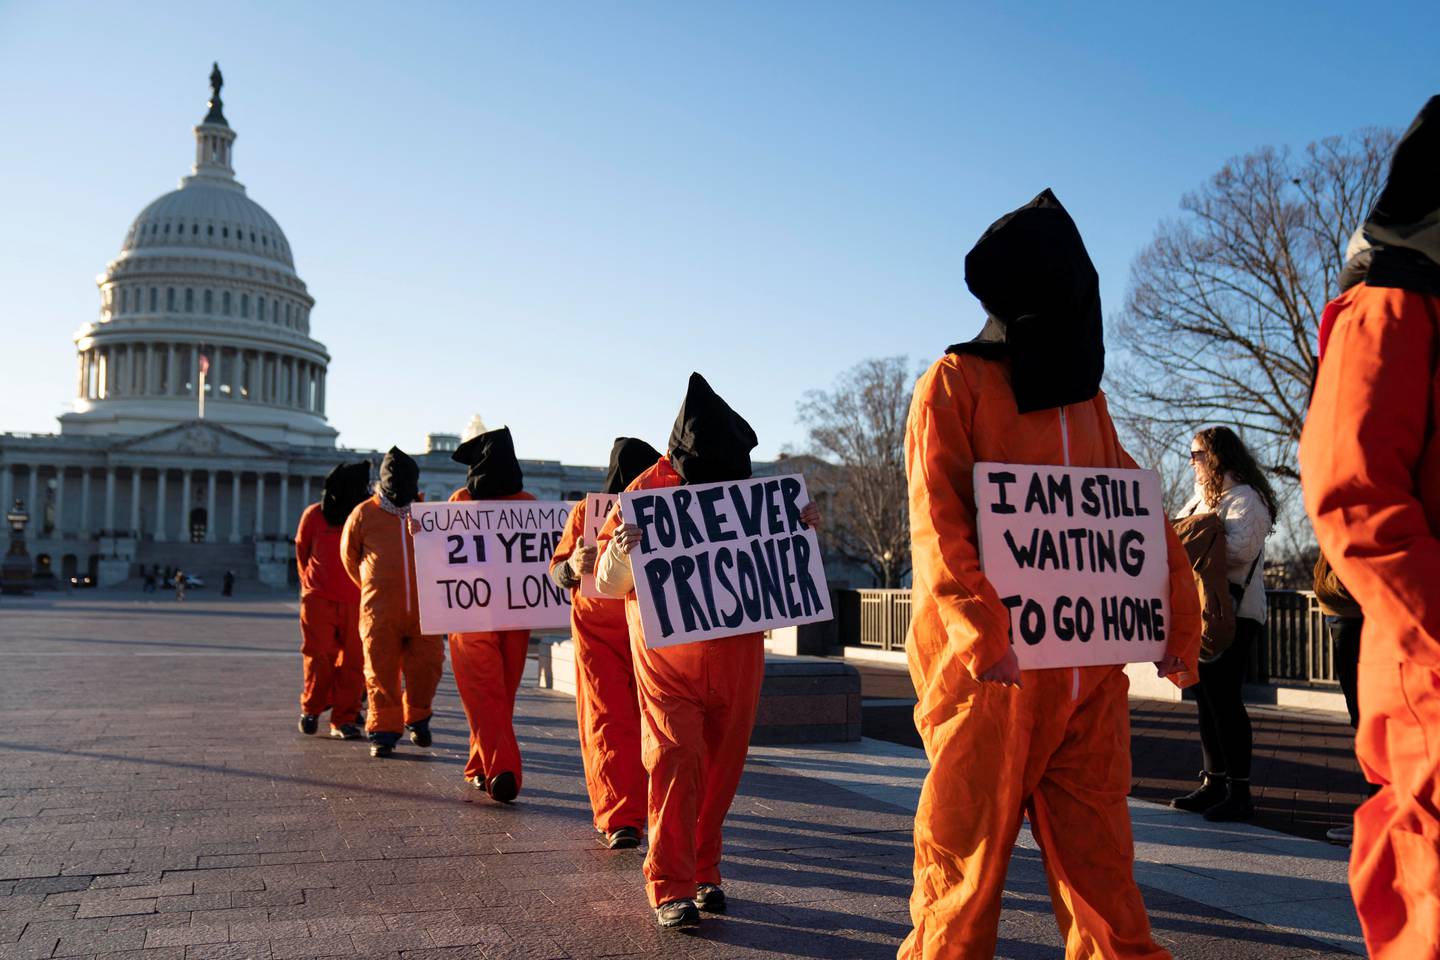 A group of people dressed as prisoners protest at the US Capitol. Reuters